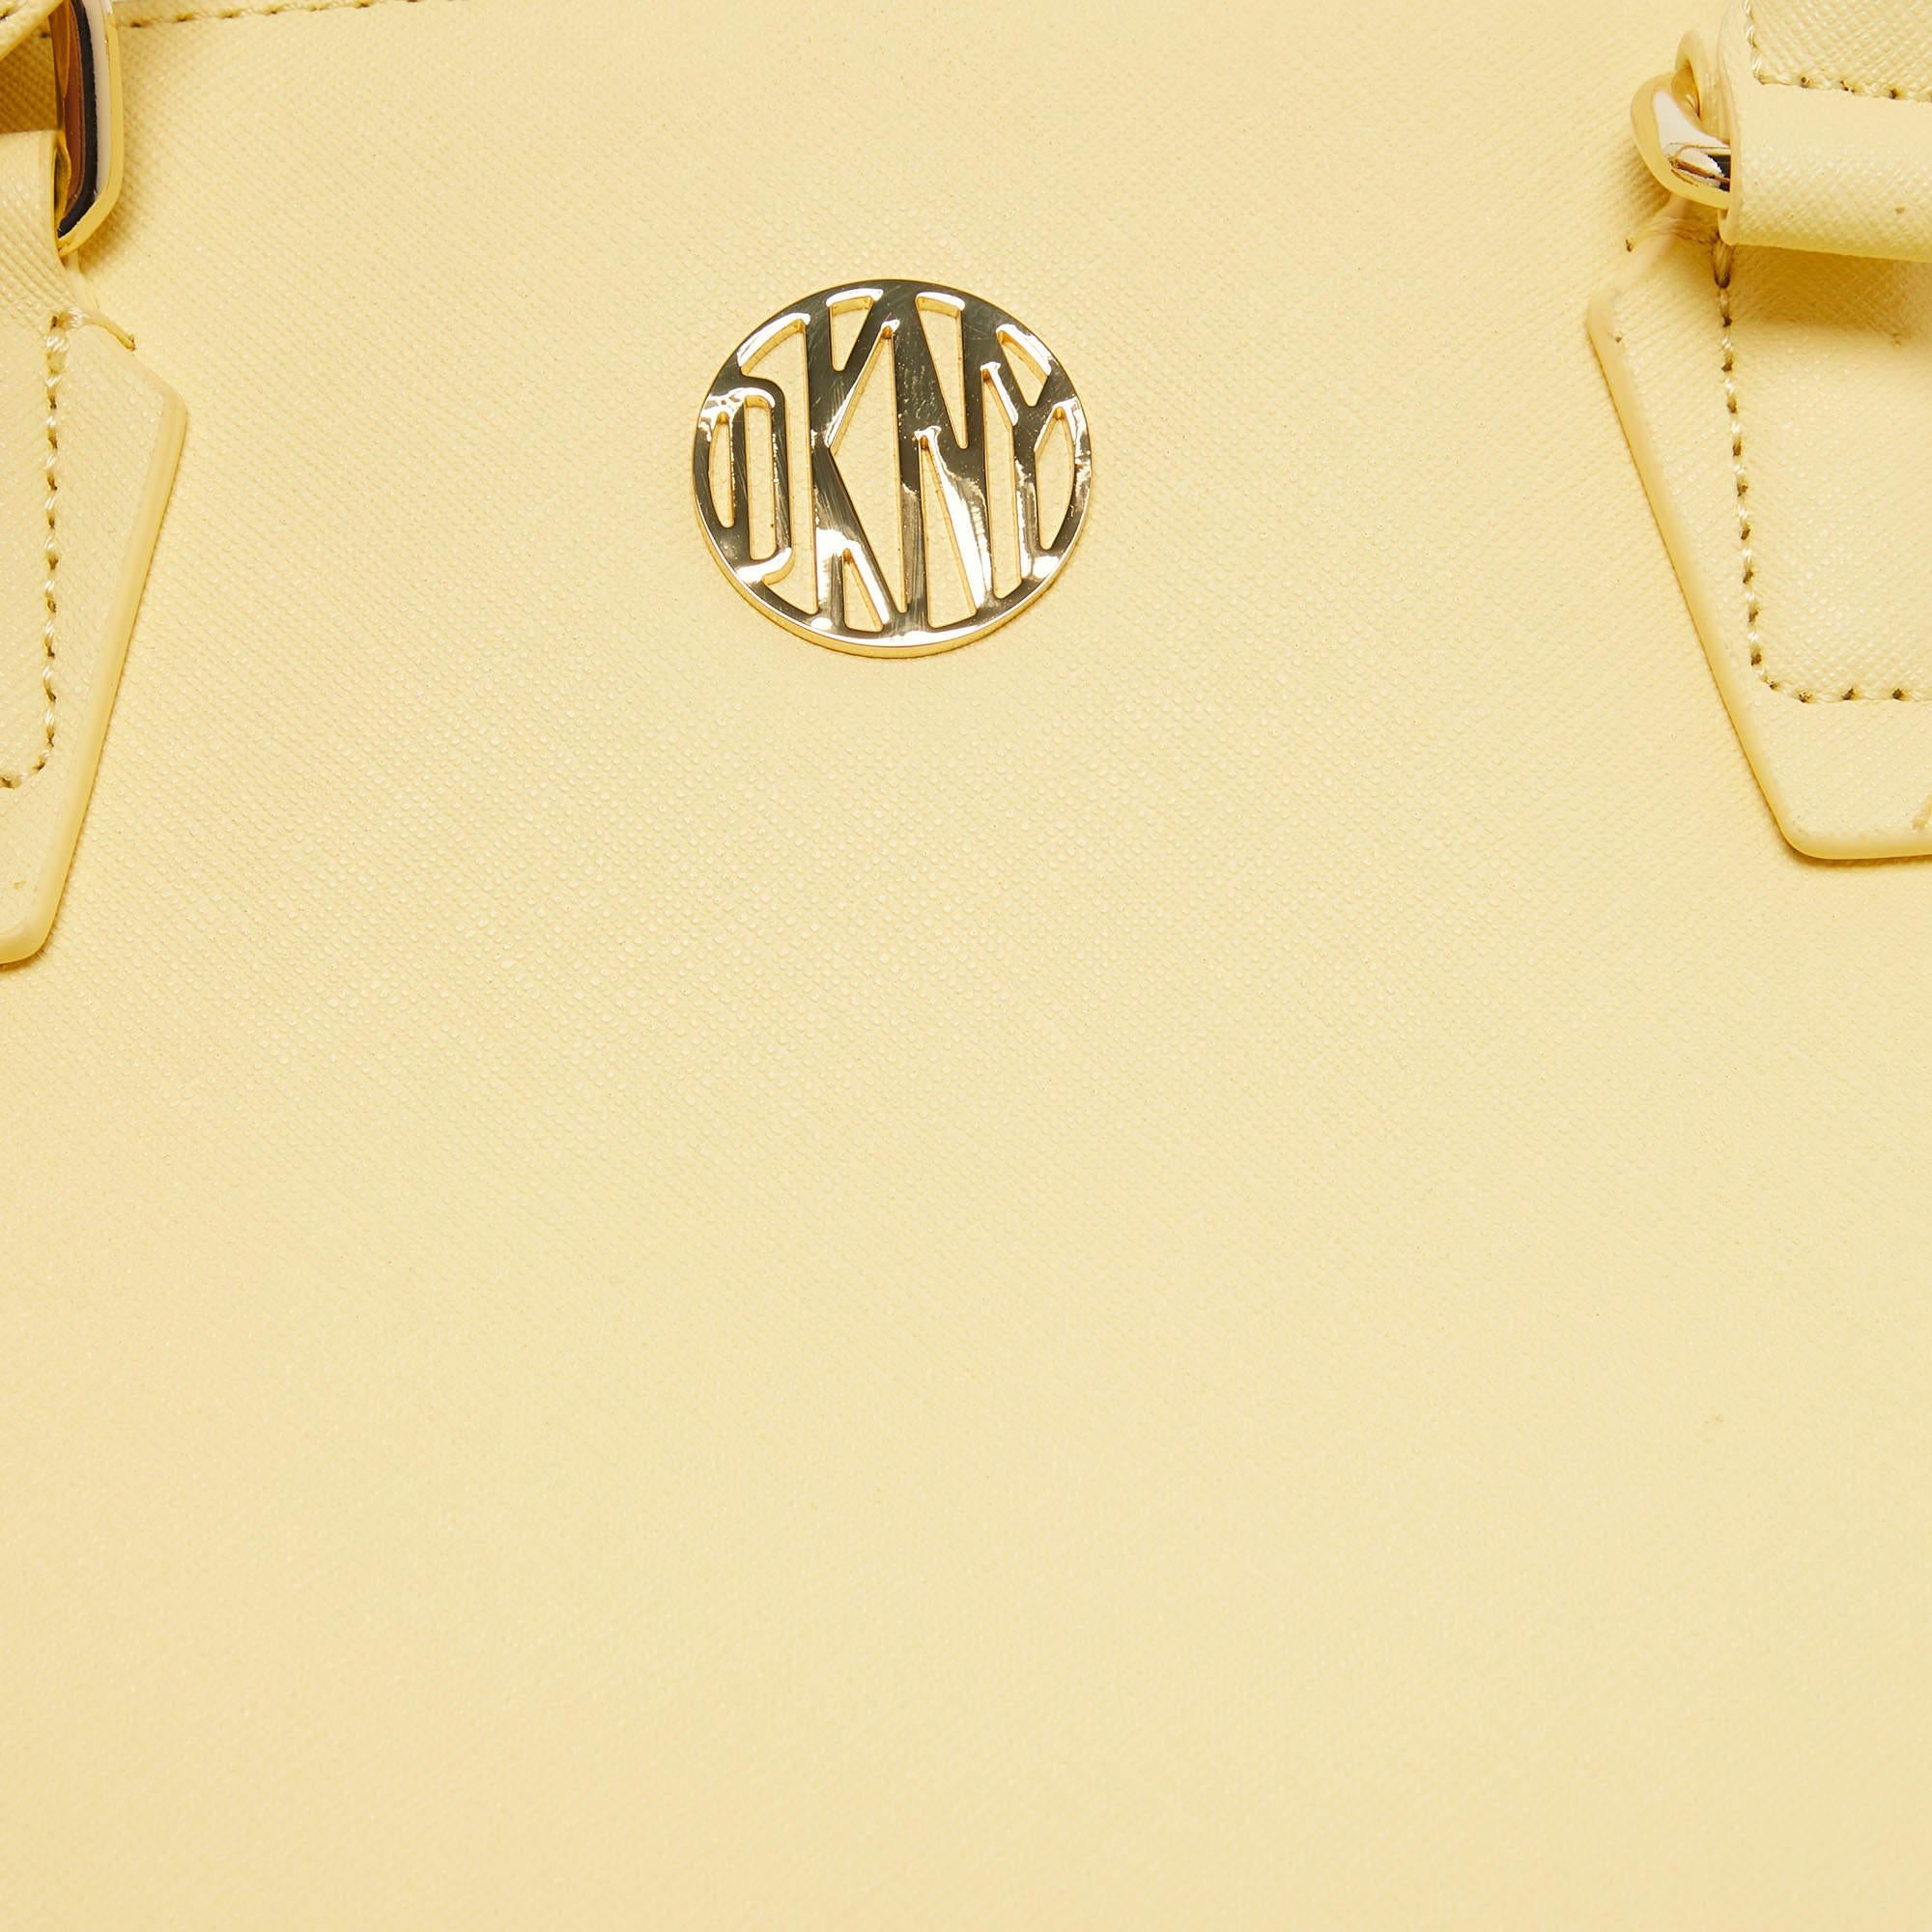 Dkny Yellow Leather Tote 2